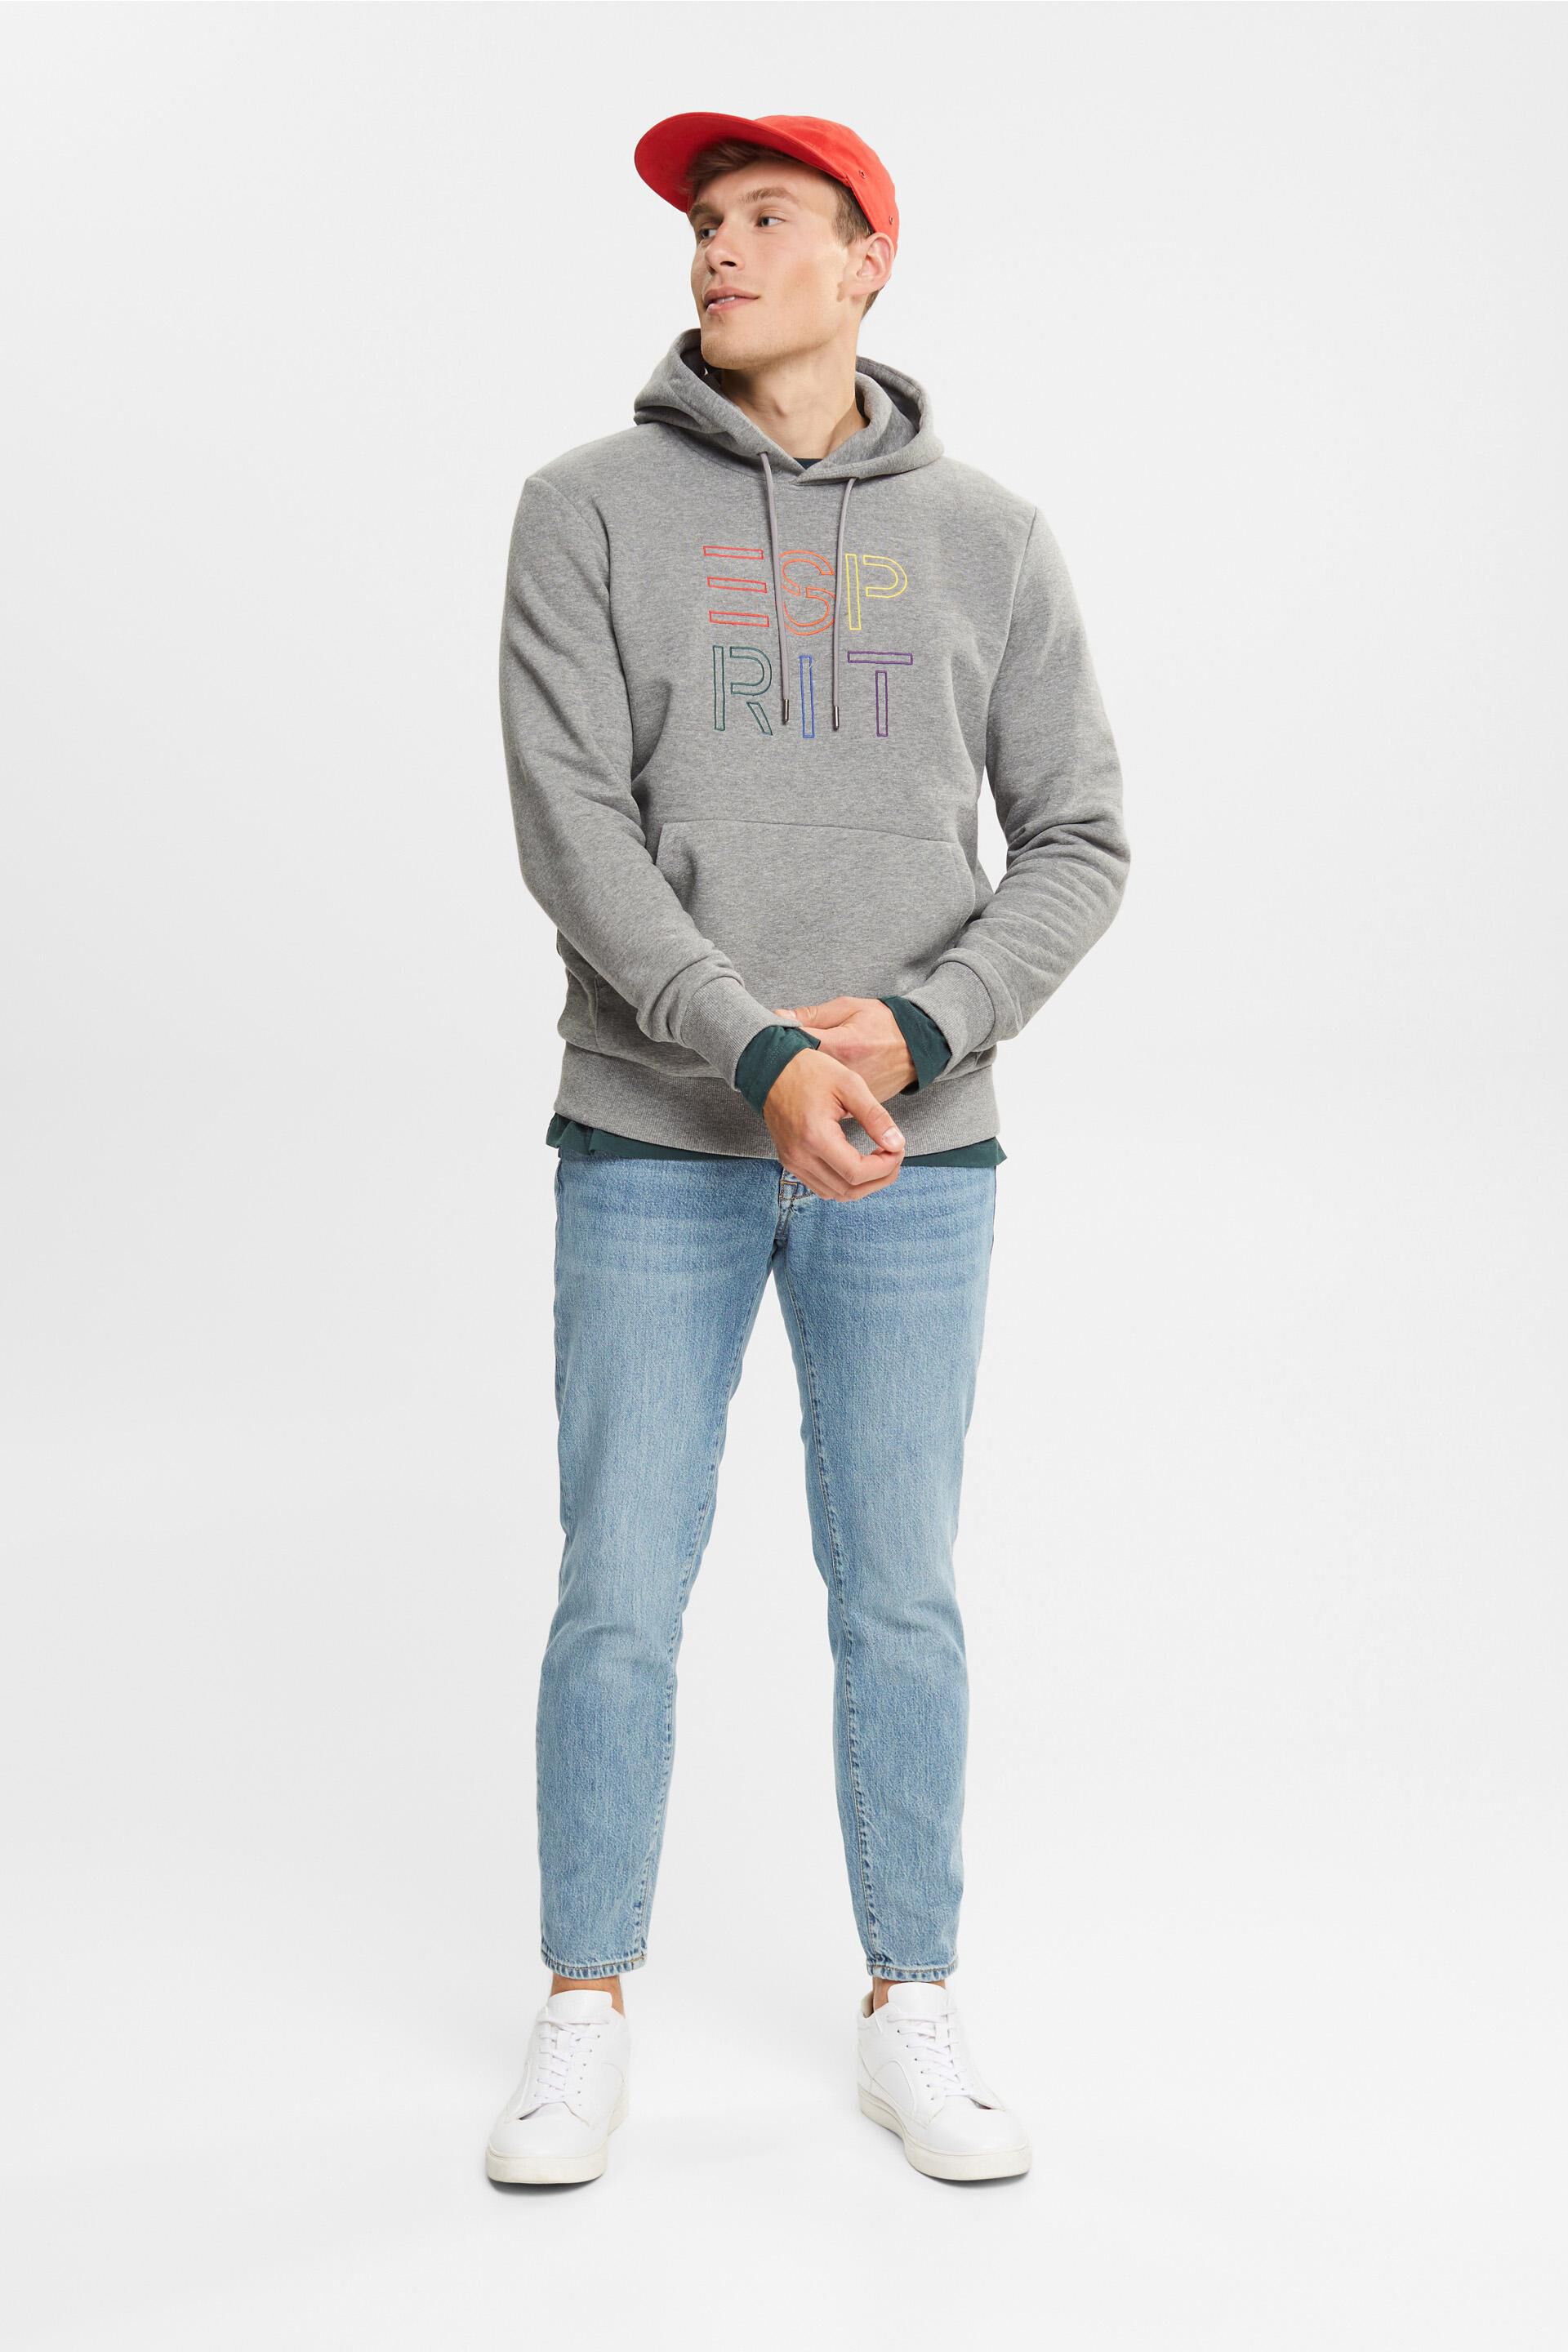 Esprit with logo Hoodie embroidered